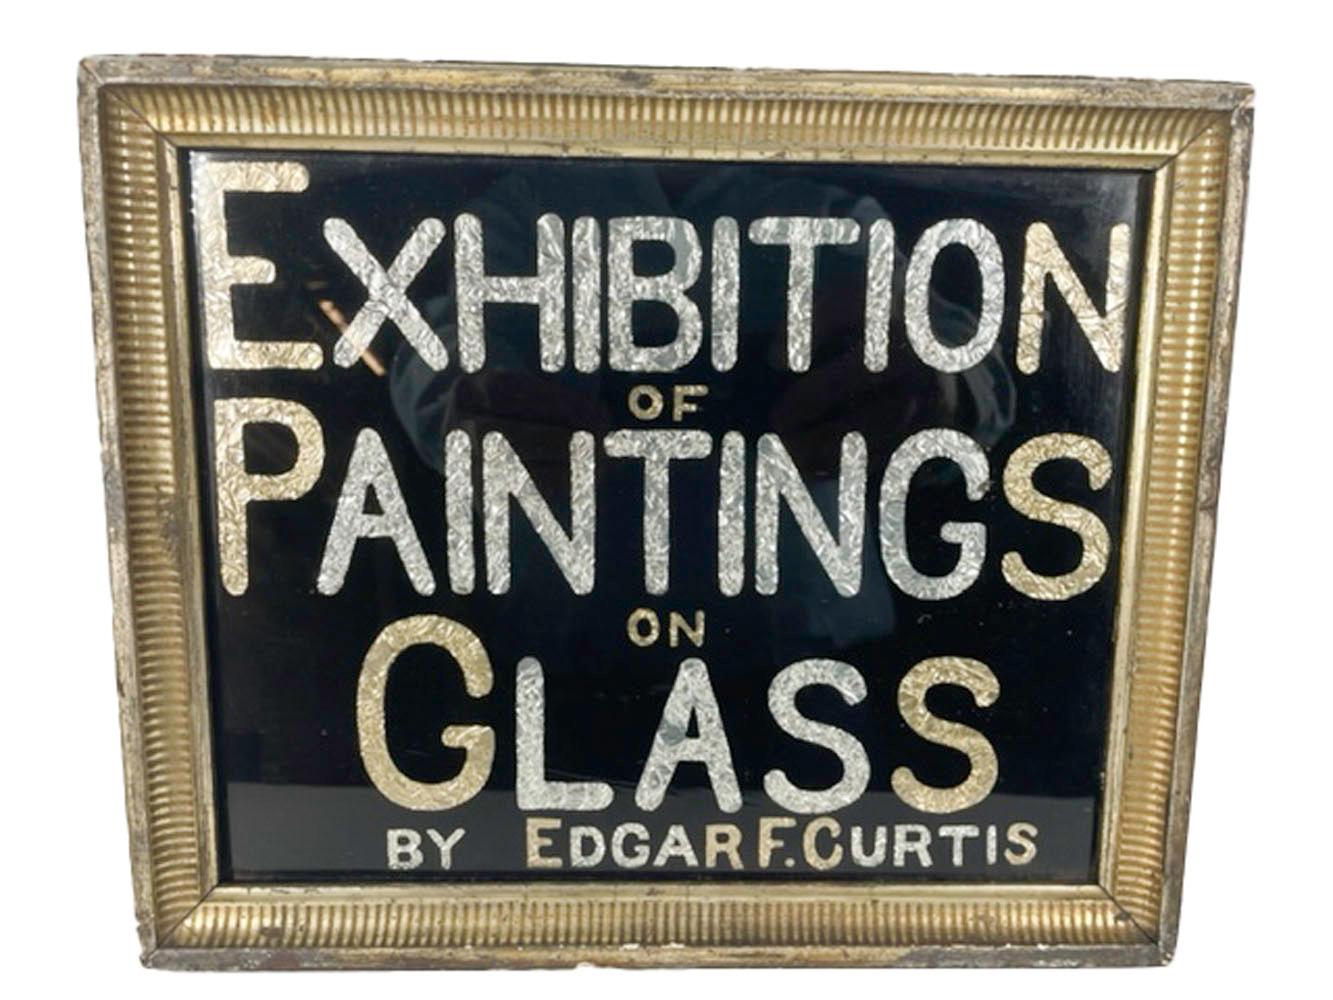 Folk Art exhibition sign, reverse painted glass with reserved text backed in gold and silver crinkled foil reading 